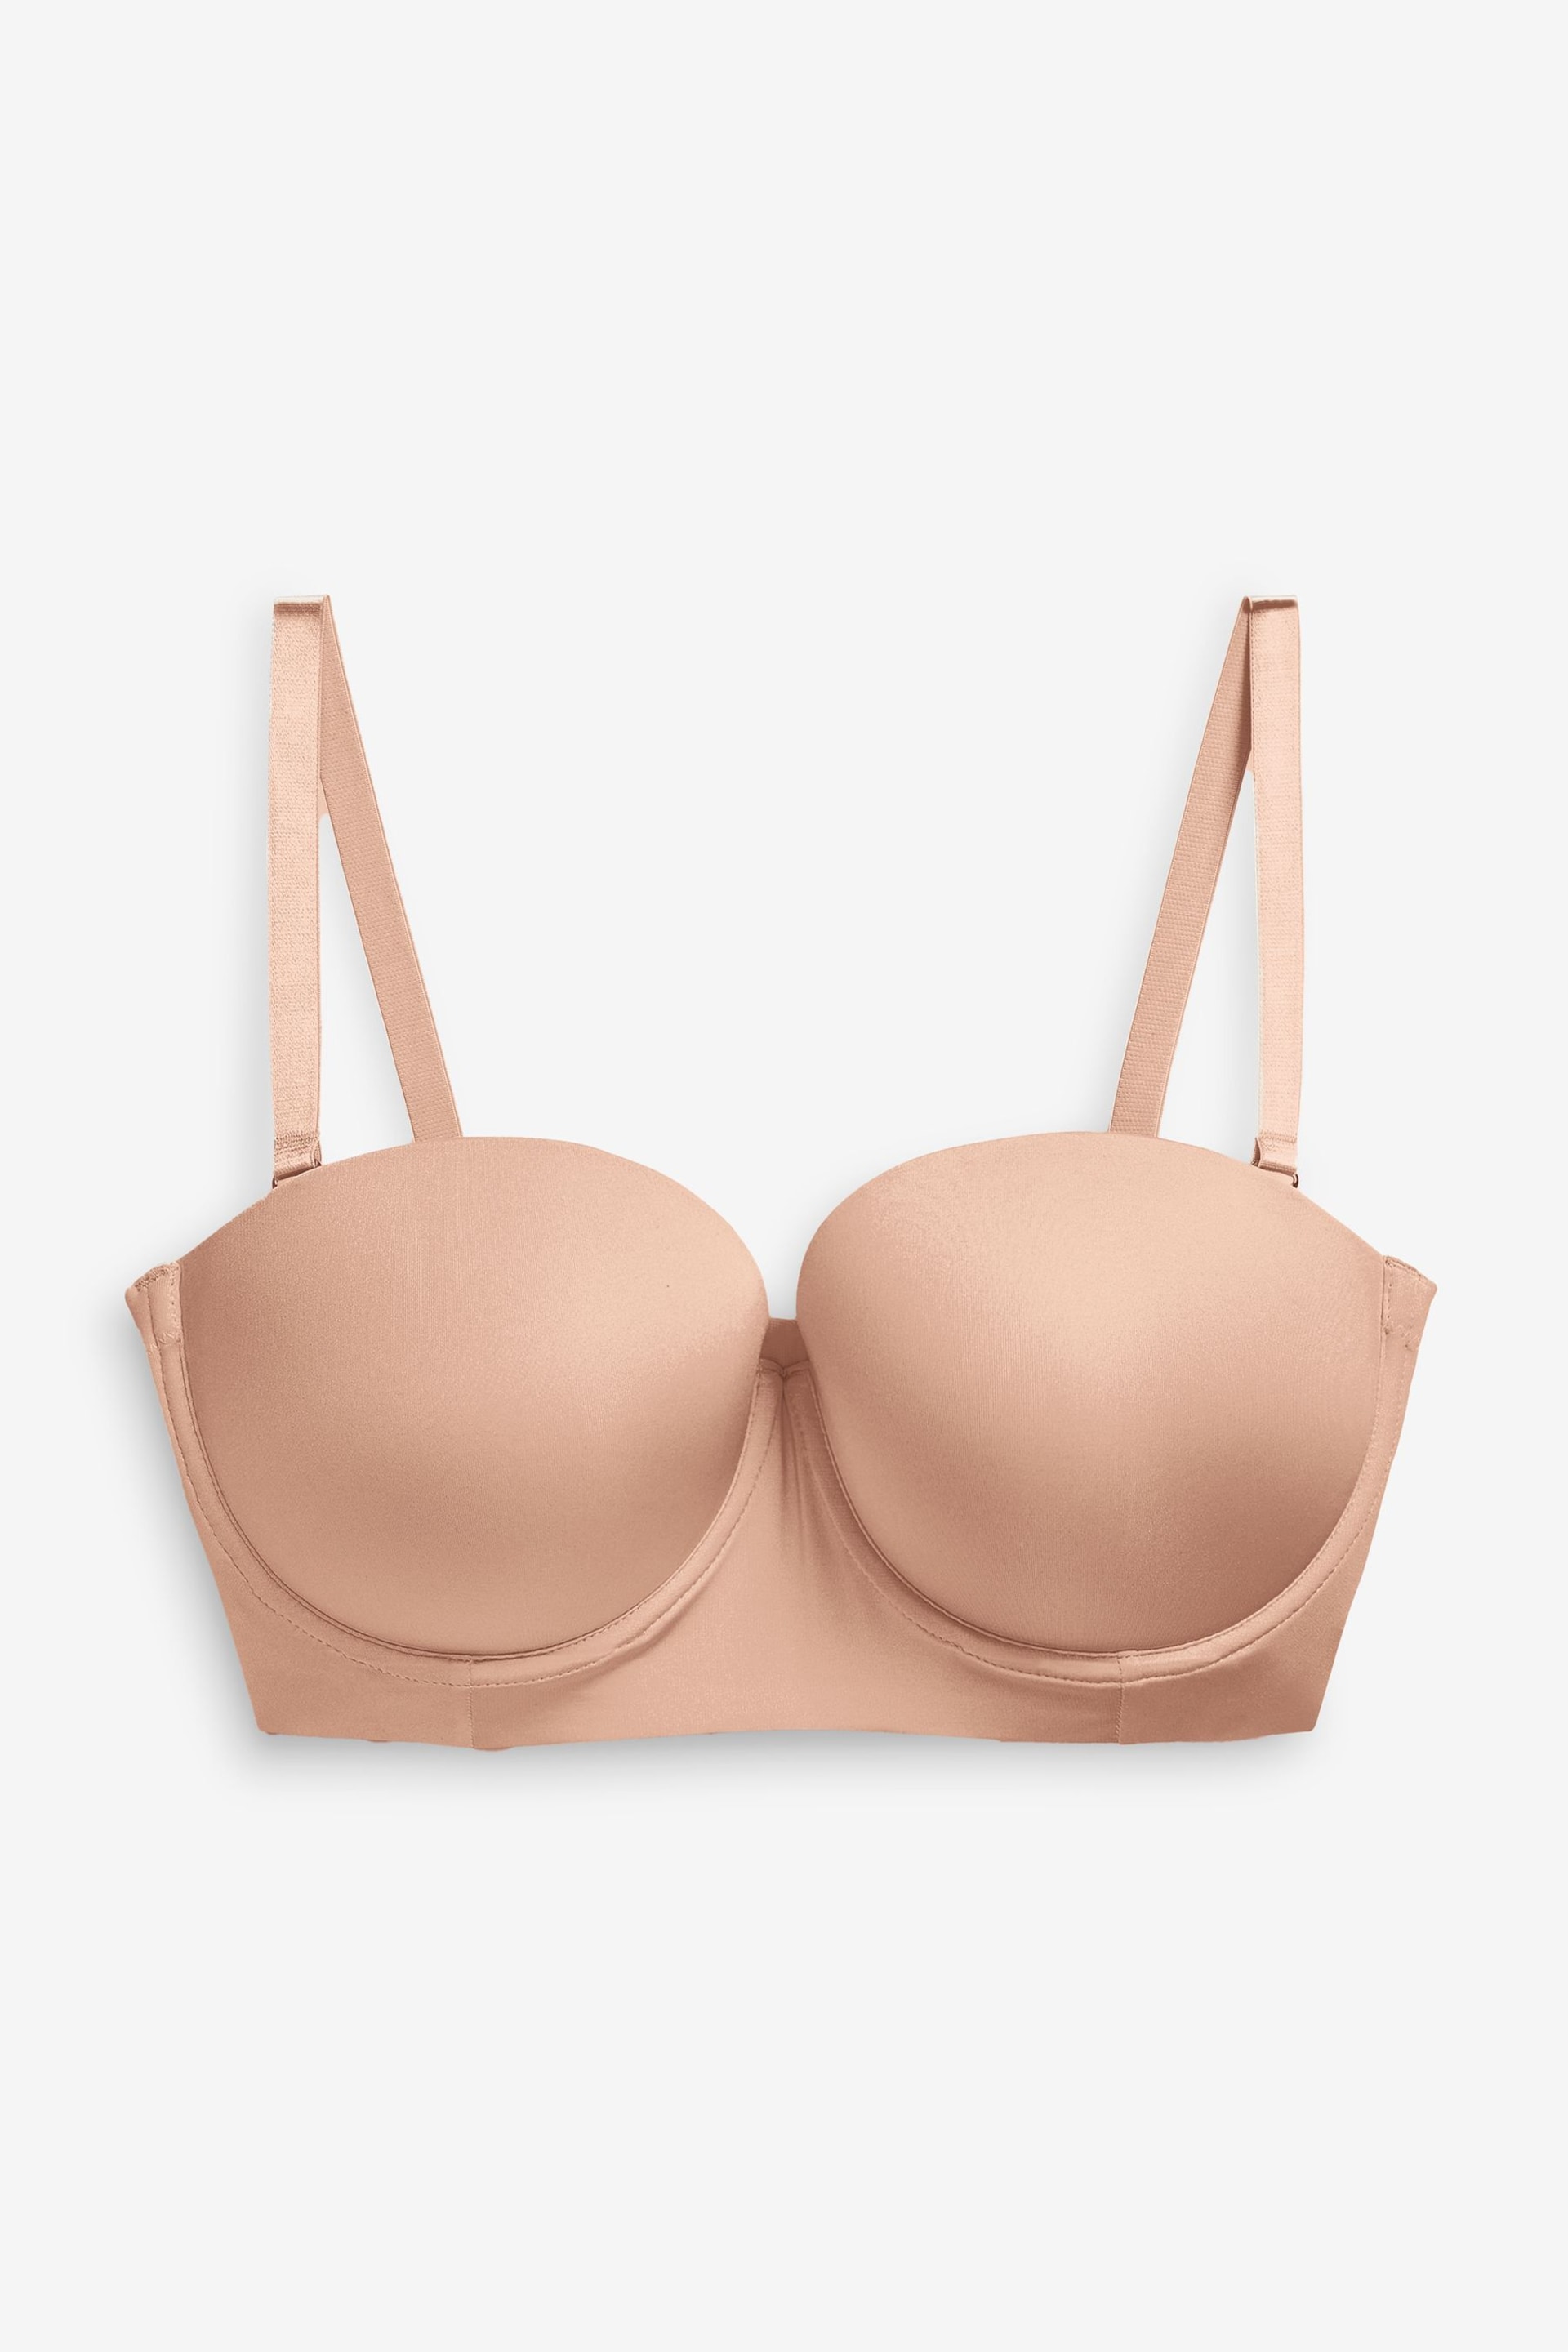 DD+ Light Pad Low Back Smoothing Strapless Bra - Image 4 of 4